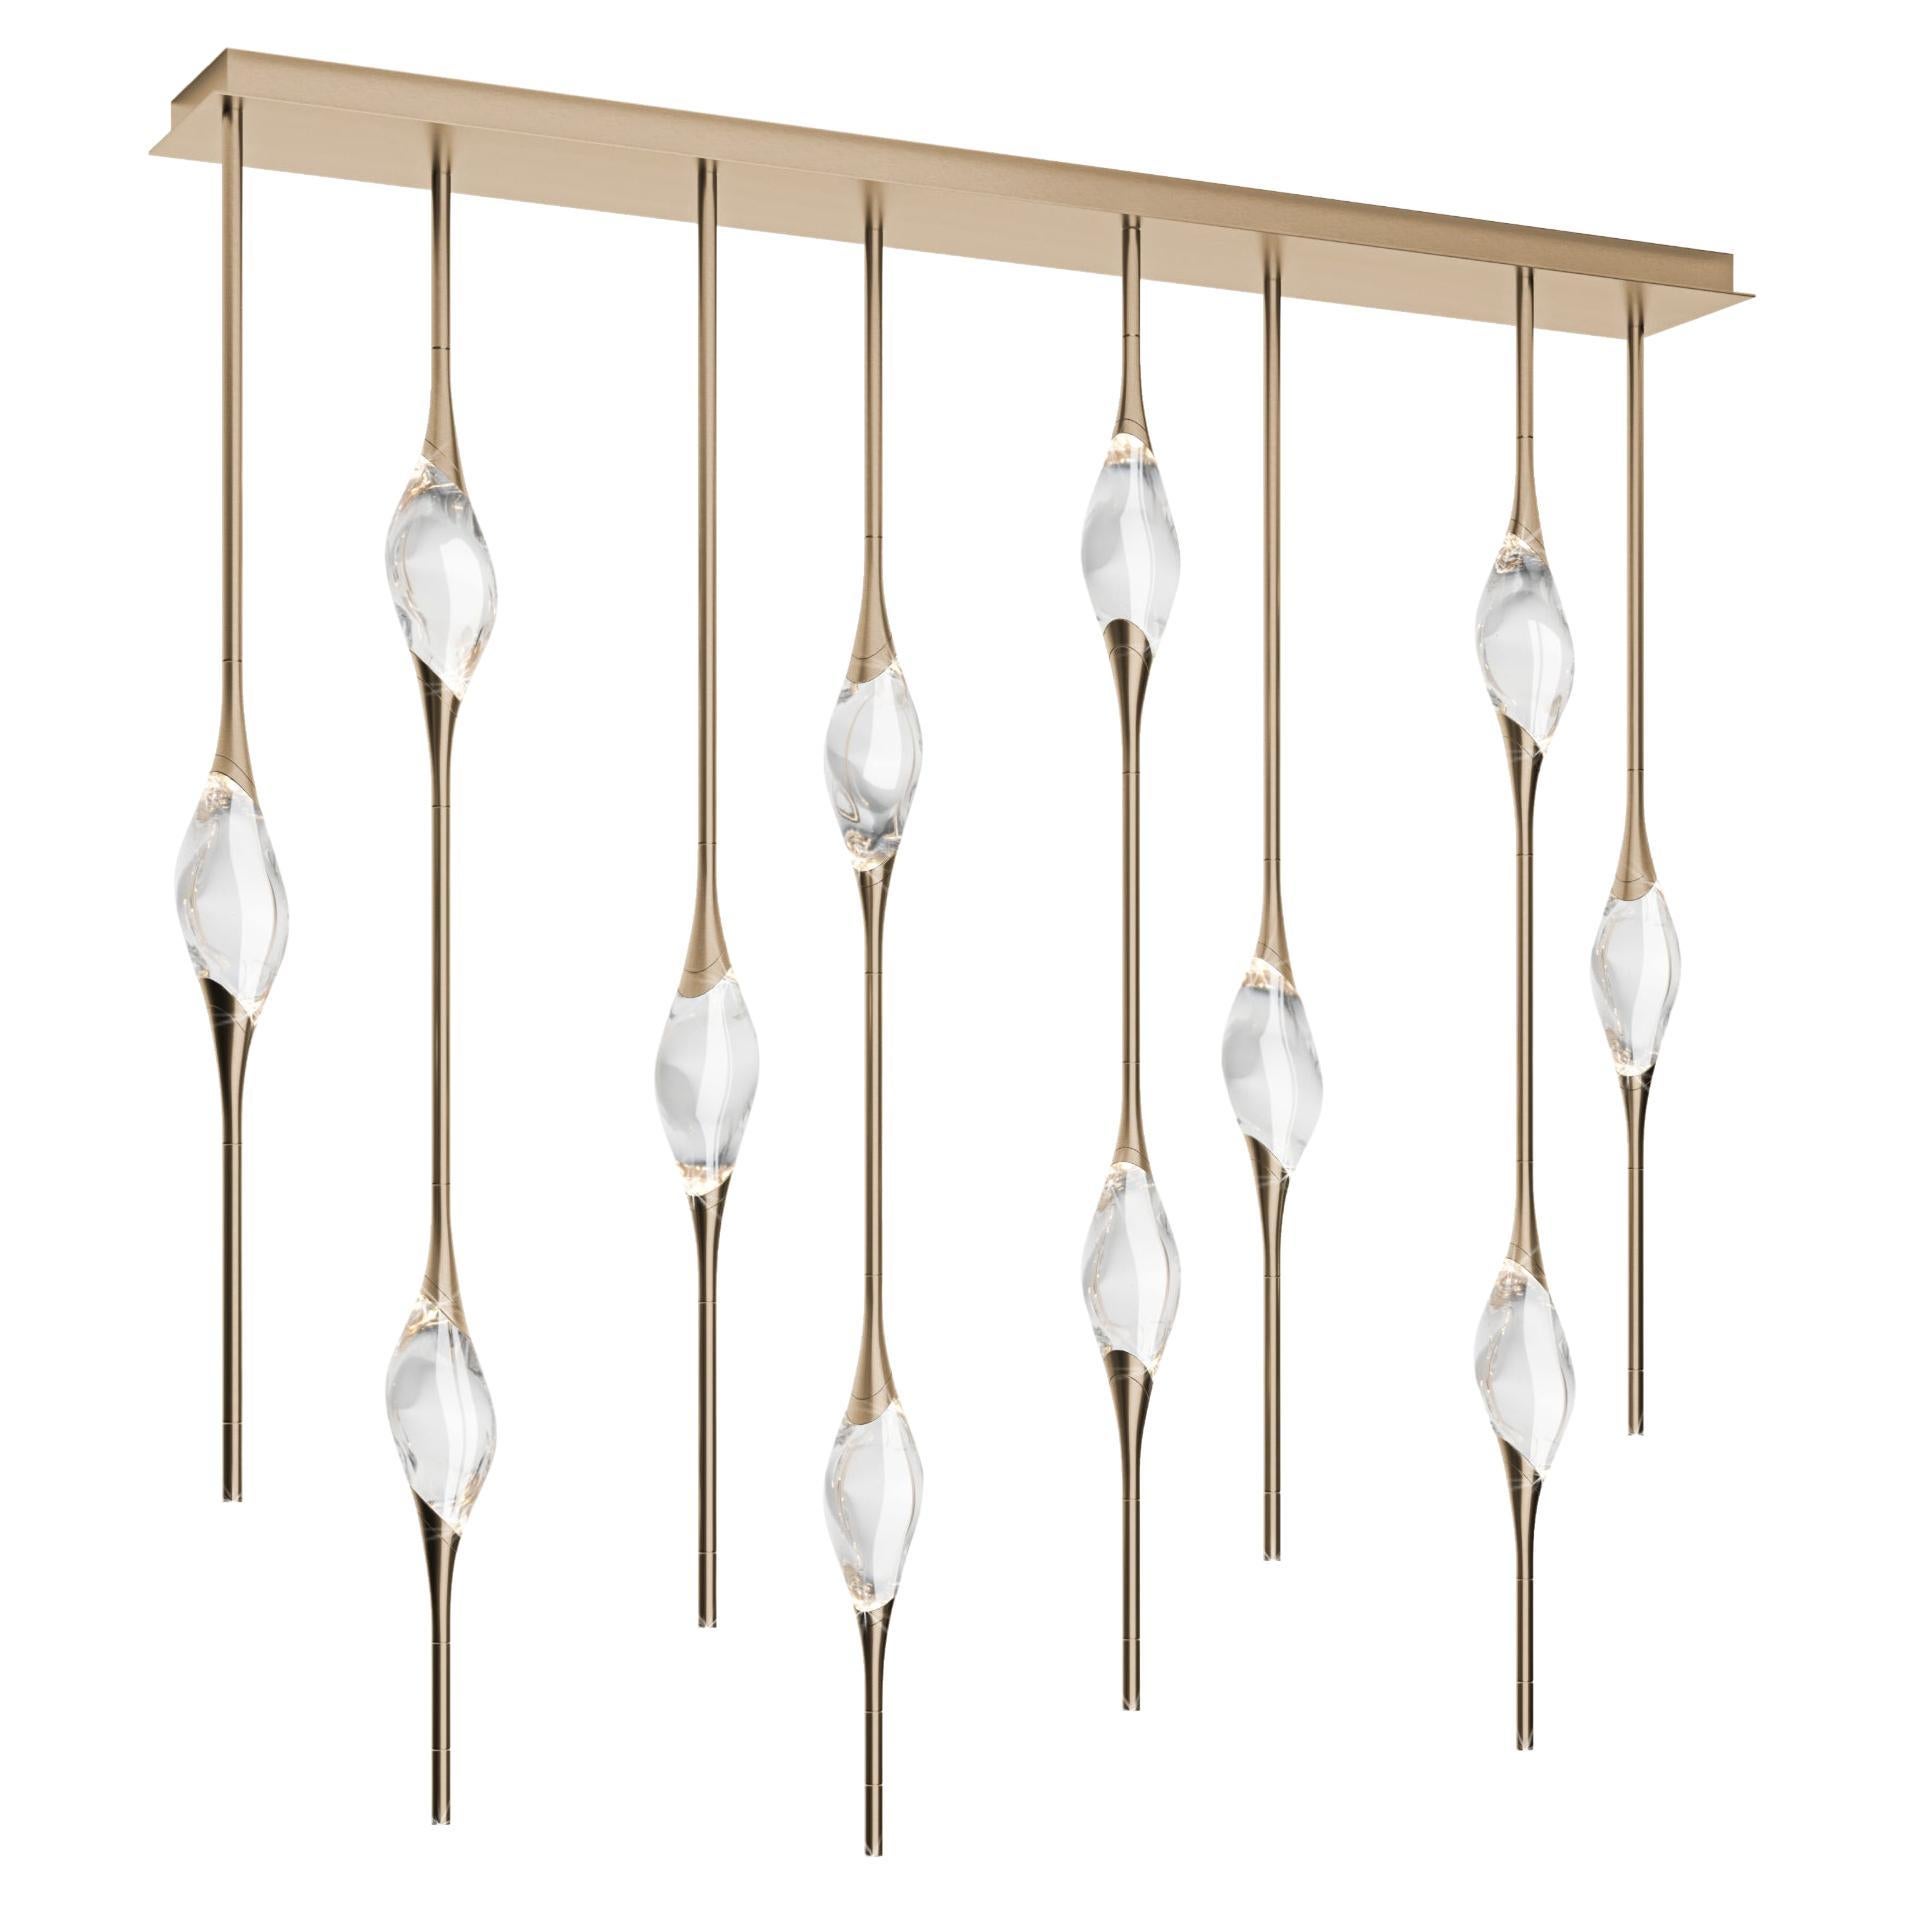 "Il Pezzo 12 Staggered Chandelier" - length 150cm/59” - satin brass - crystal For Sale